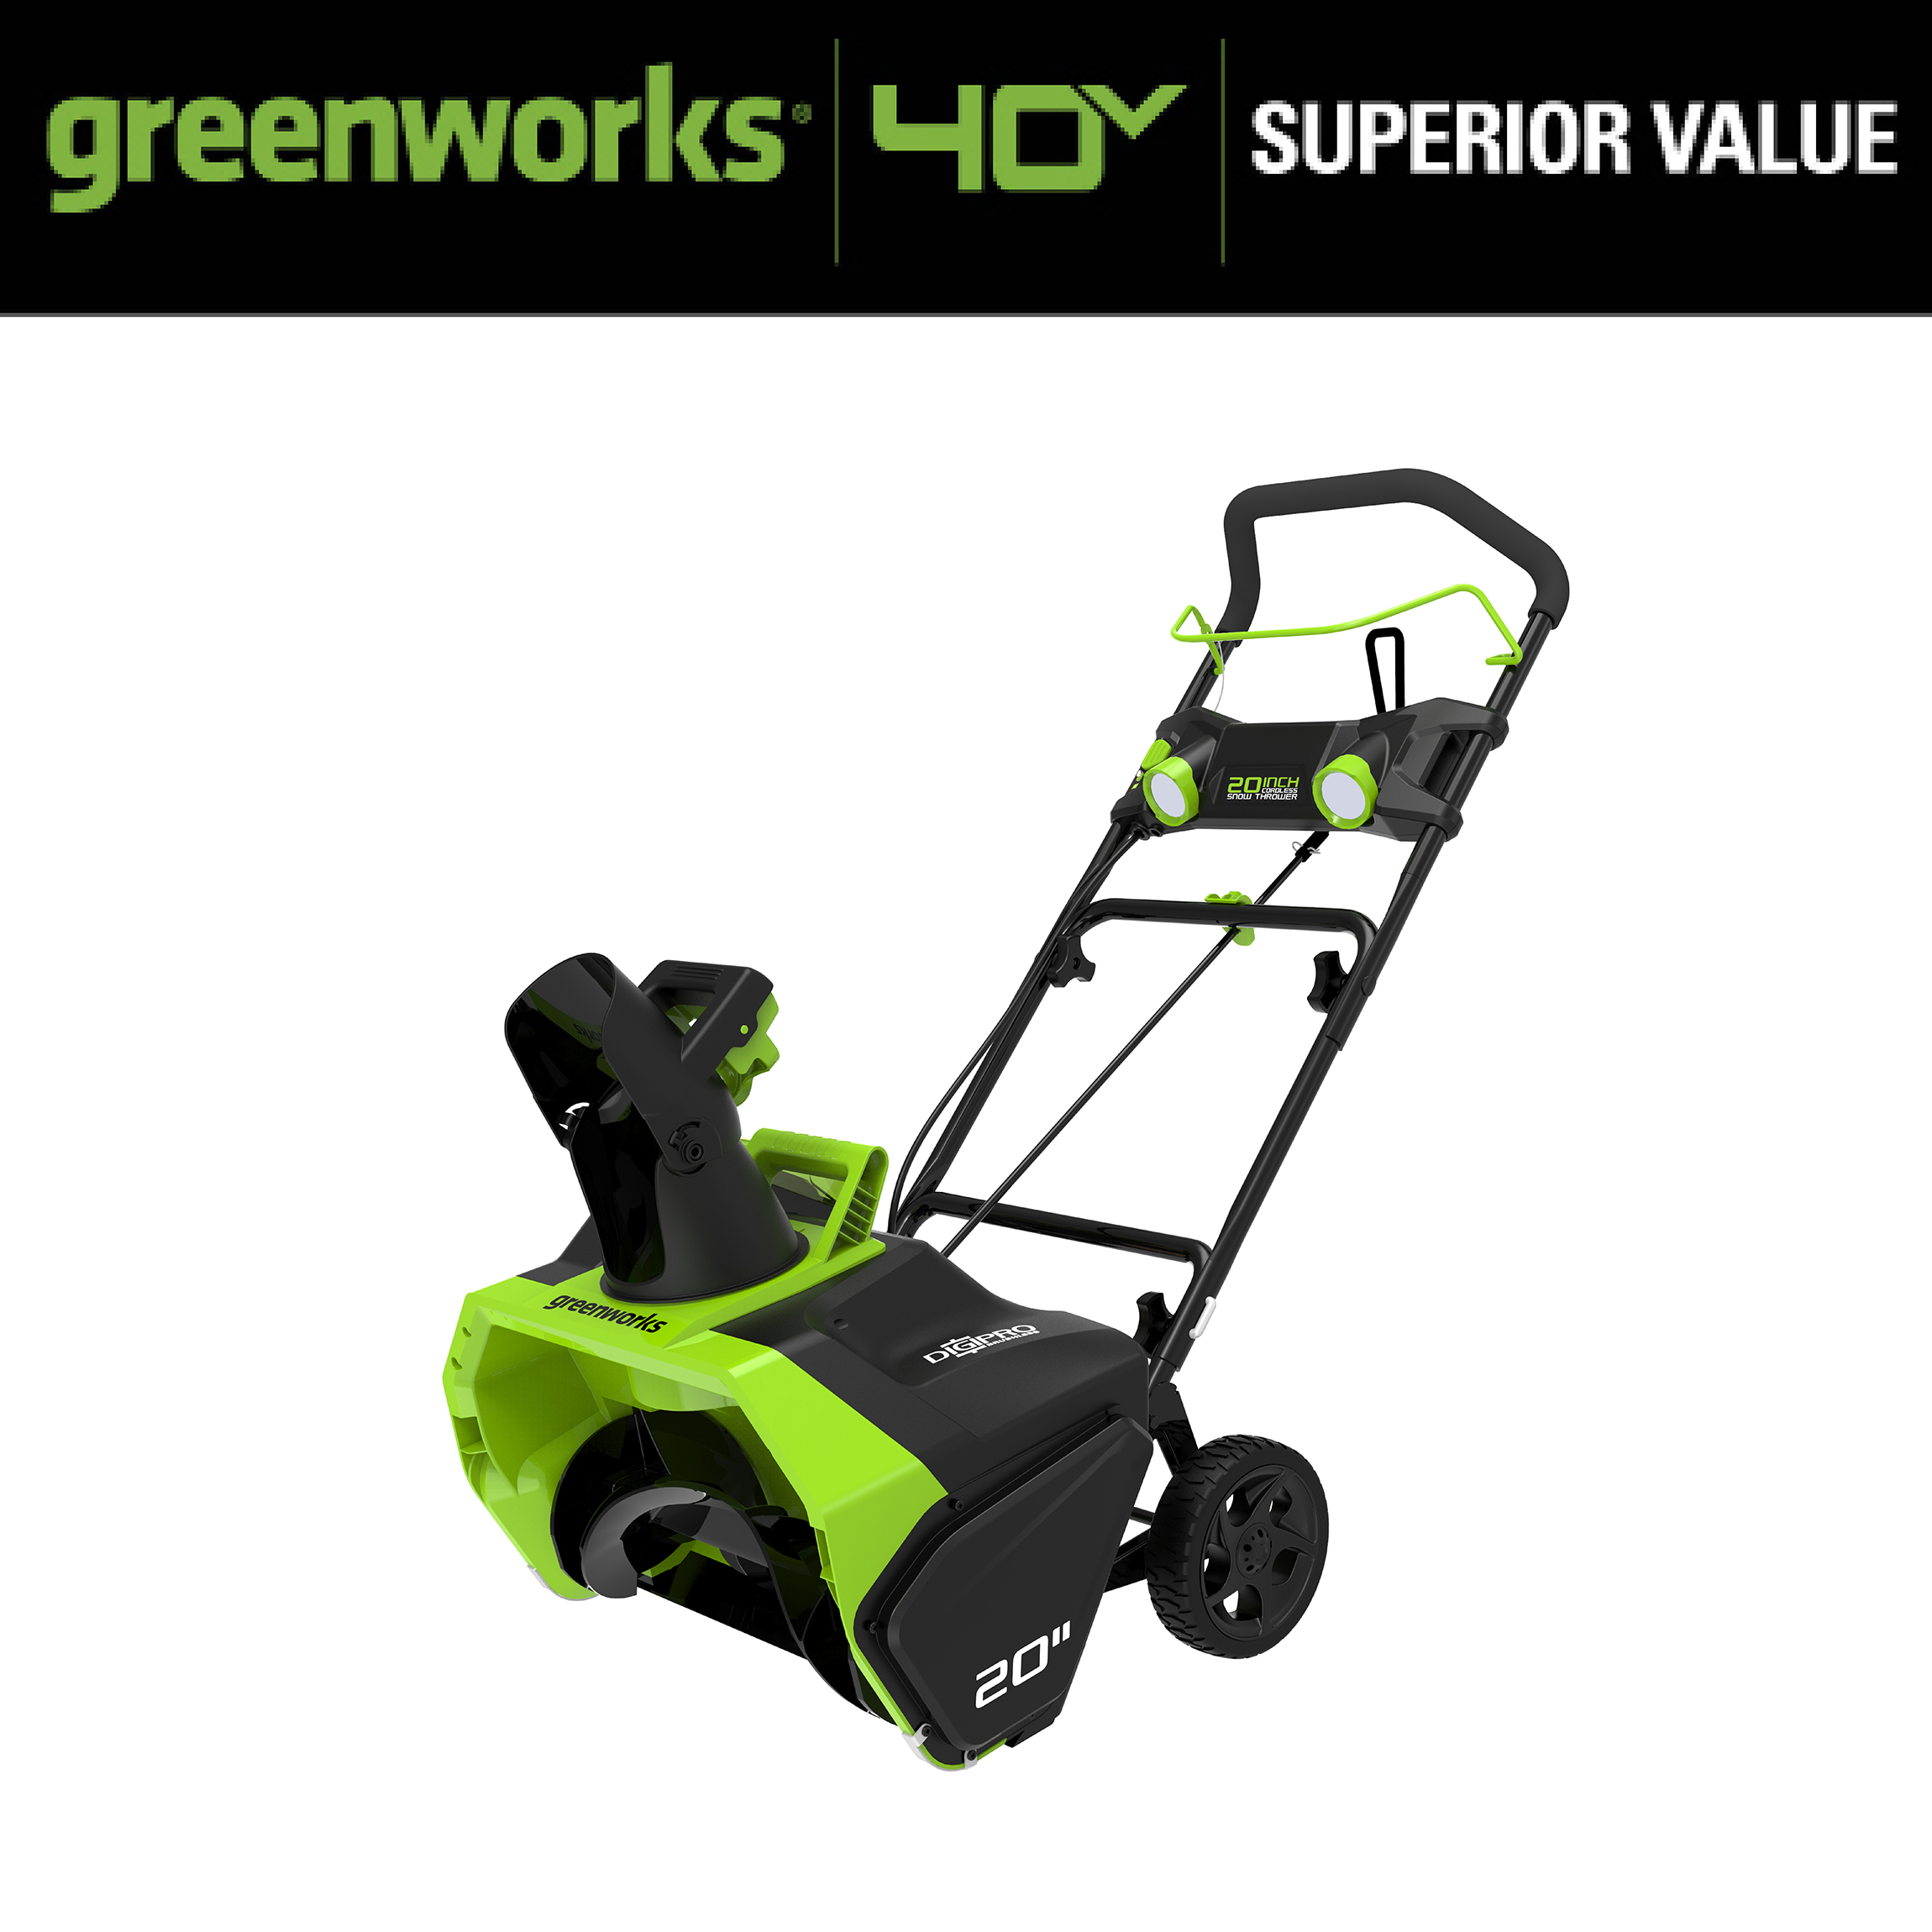 Greenworks 40V 20" Cordless Brushless Snow Blower + (1) 4.0 Ah Battery and Charger 26272 - image 3 of 9